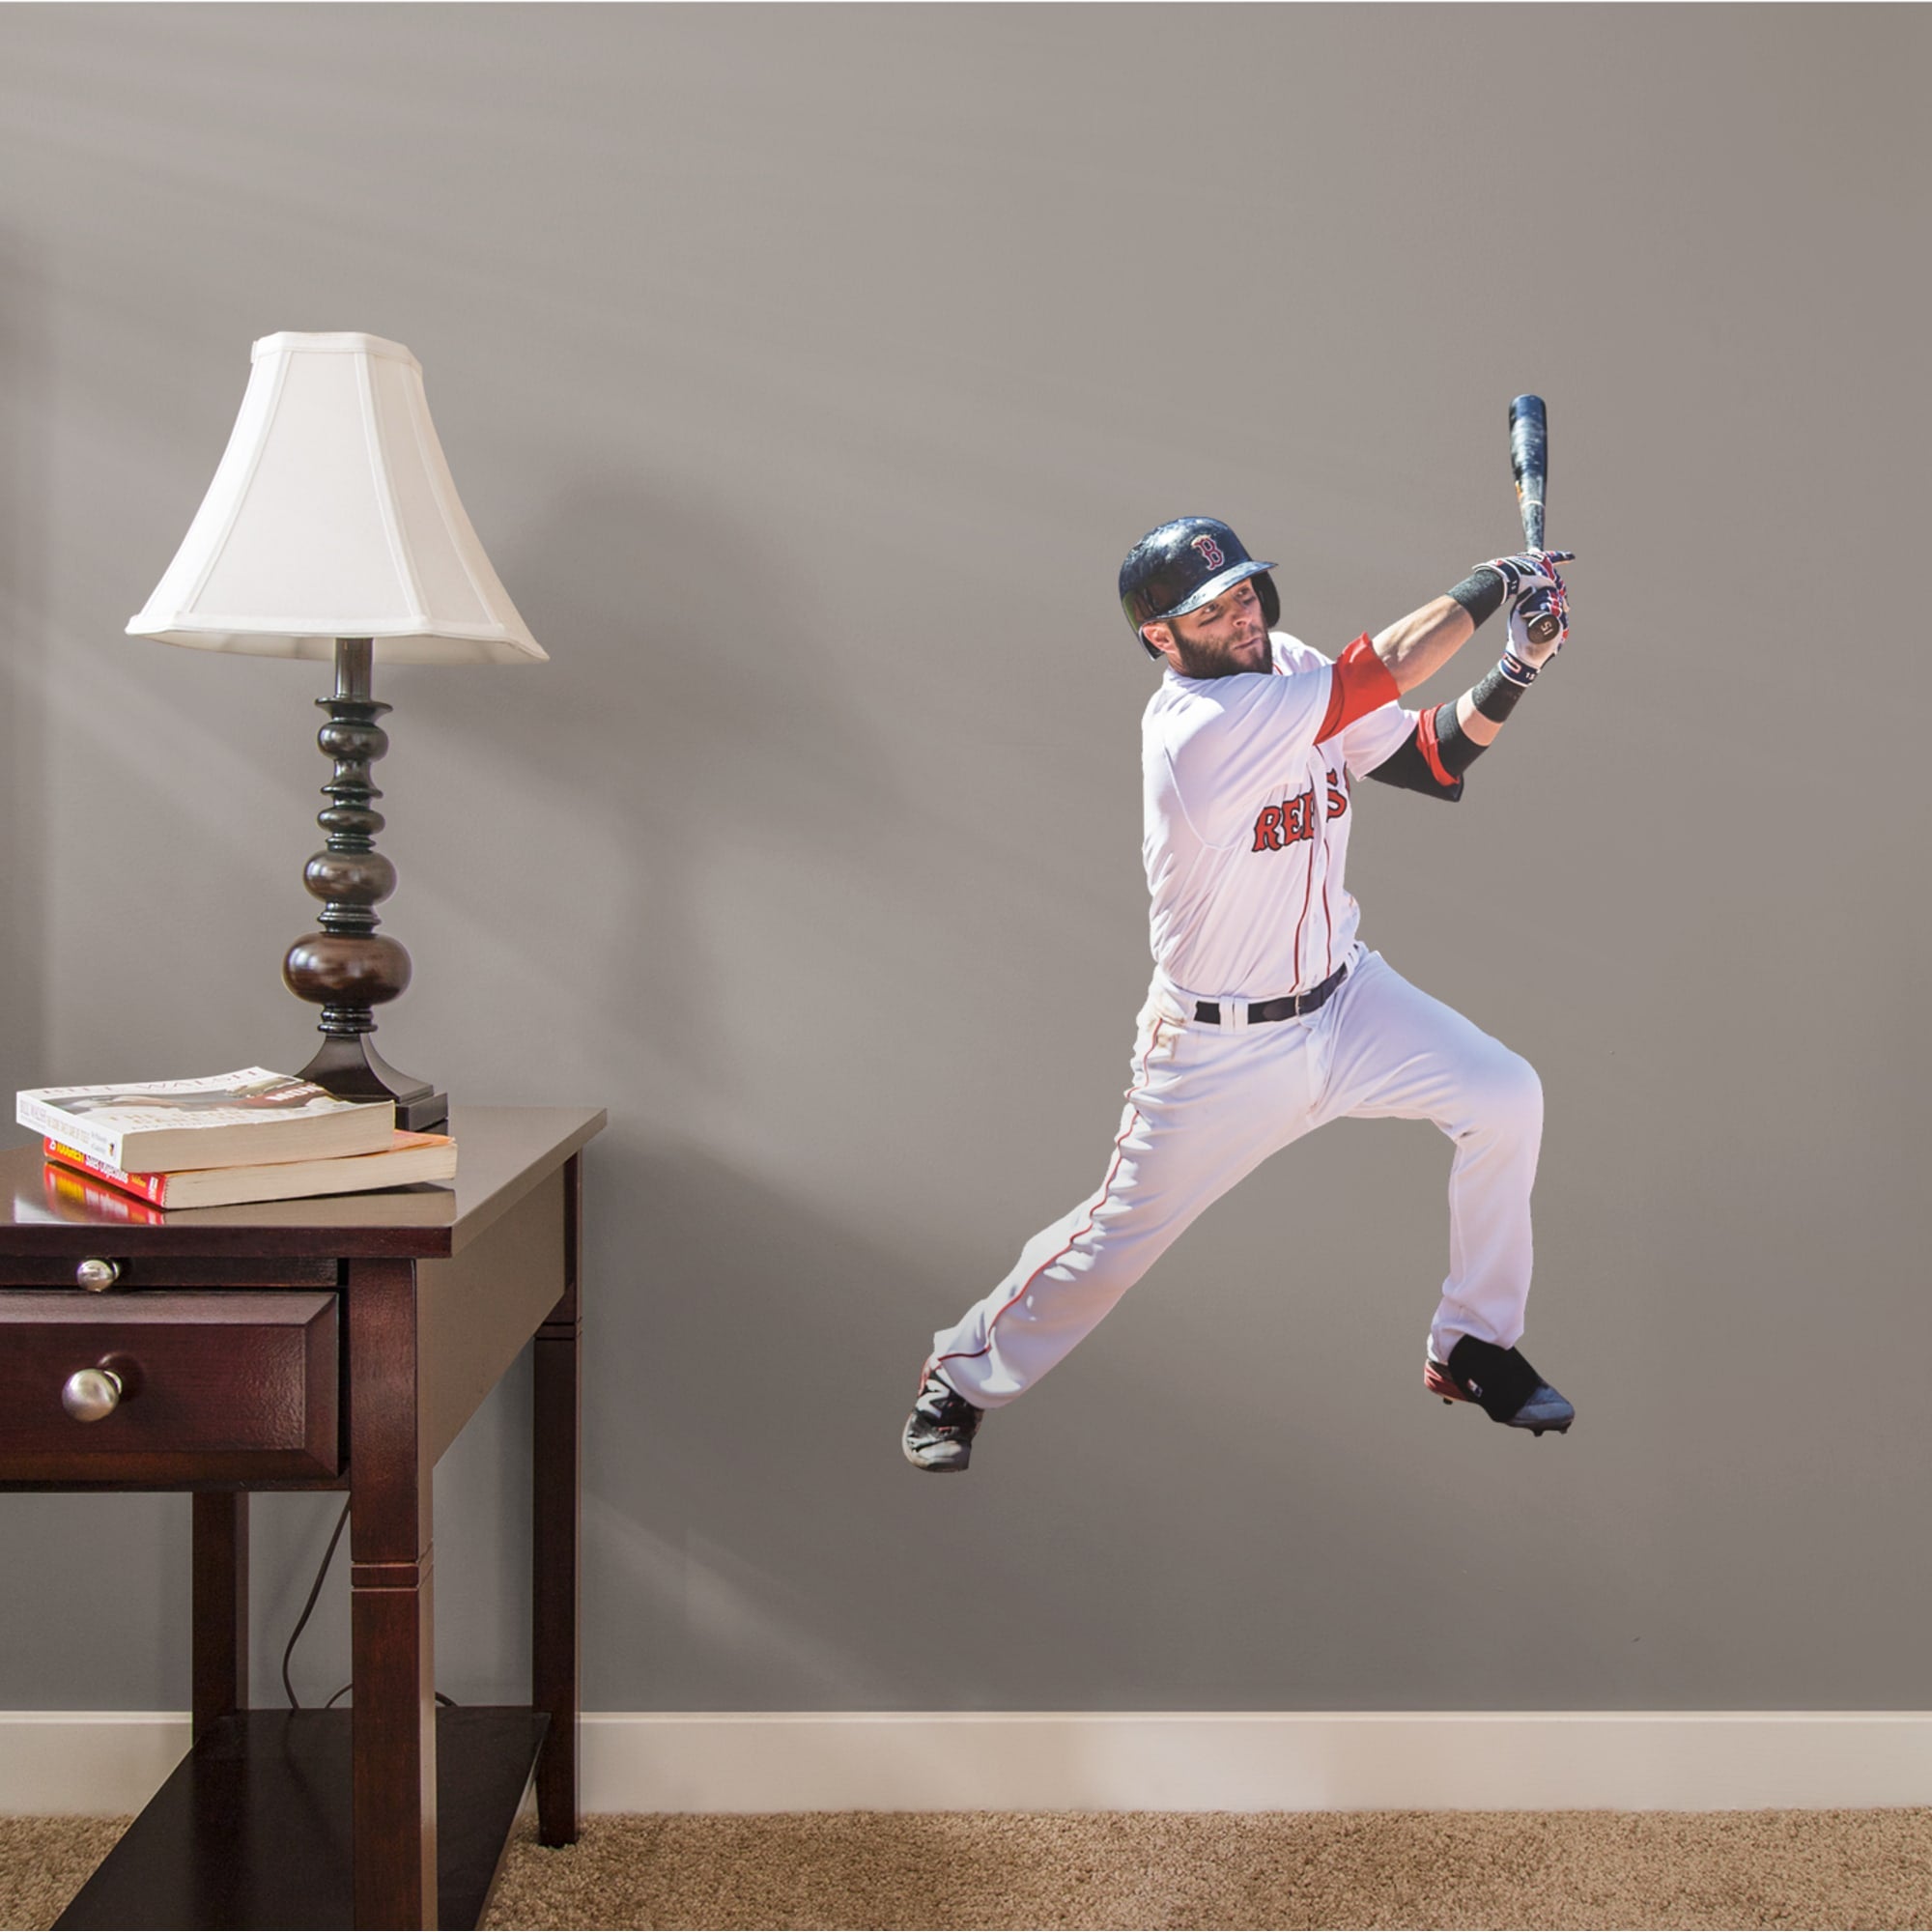 Dustin Pedroia for Boston Red Sox - Officially Licensed MLB Removable Wall Decal 24.0"W x 38.0"H by Fathead | Vinyl